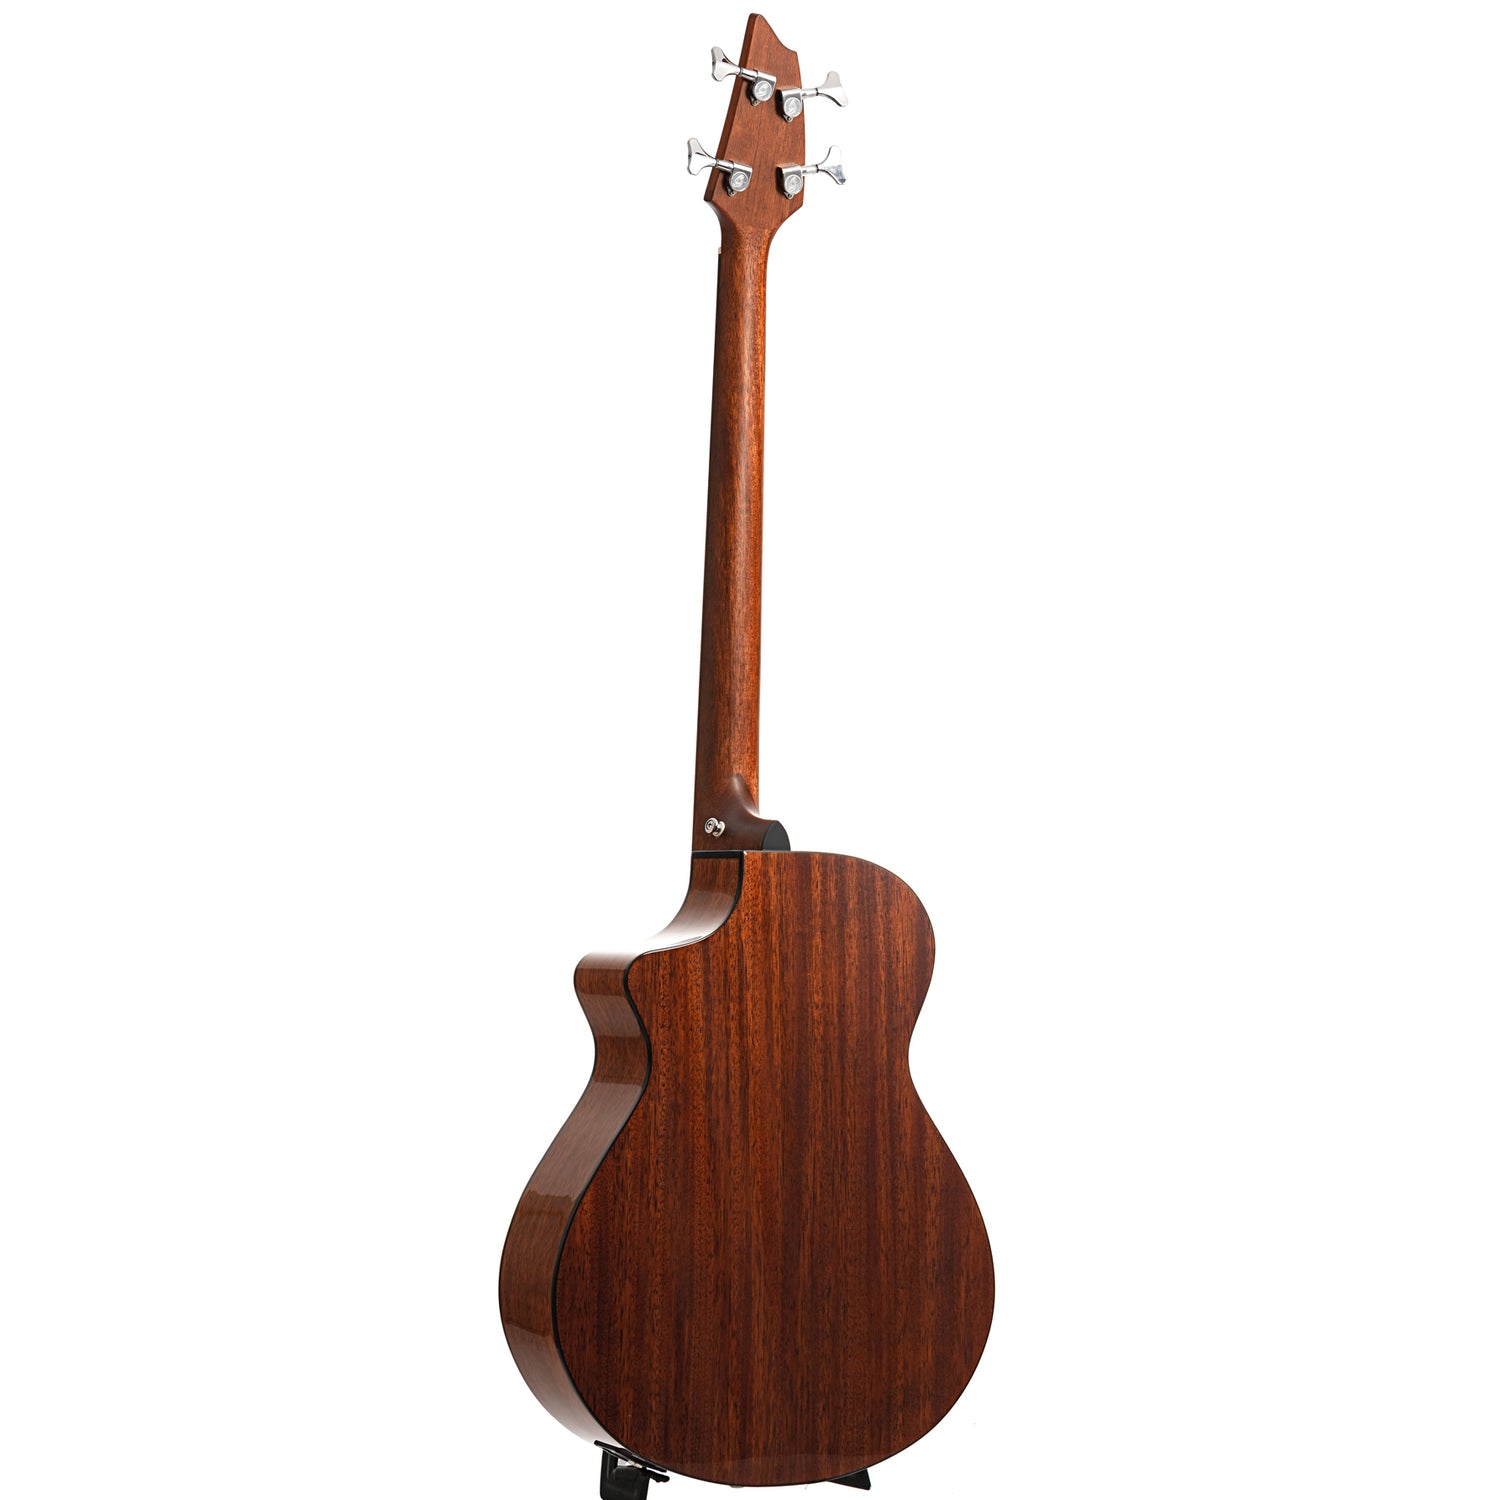 Image 12 of Breedlove Discovery S Concert Edgeburst Bass CE Sitka-African Mahogany Acoustic-Electric Bass Guitar - SKU# DSCN44BCESSAM : Product Type Flat-top Guitars : Elderly Instruments